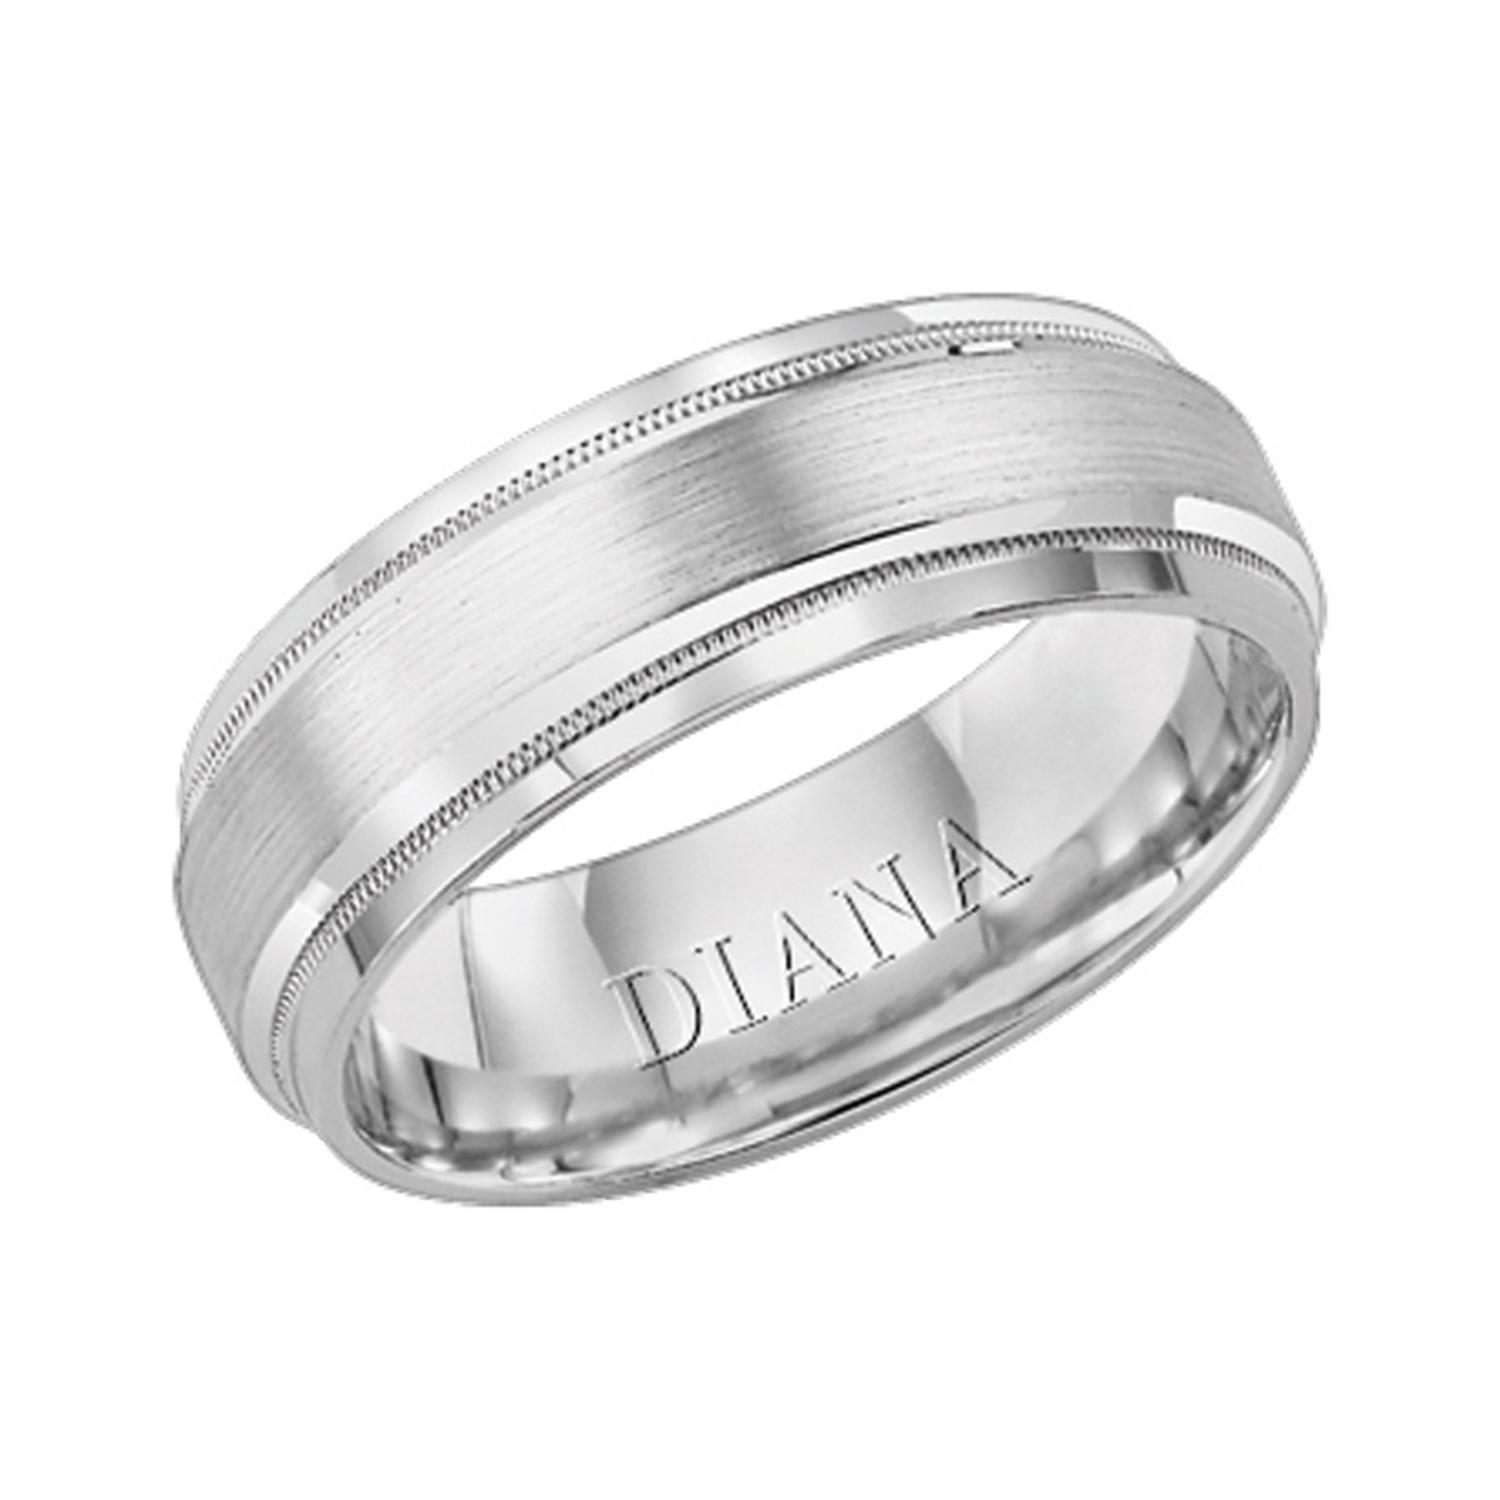 Gents 18K White Gold Wedding Band with Milgrain Accent